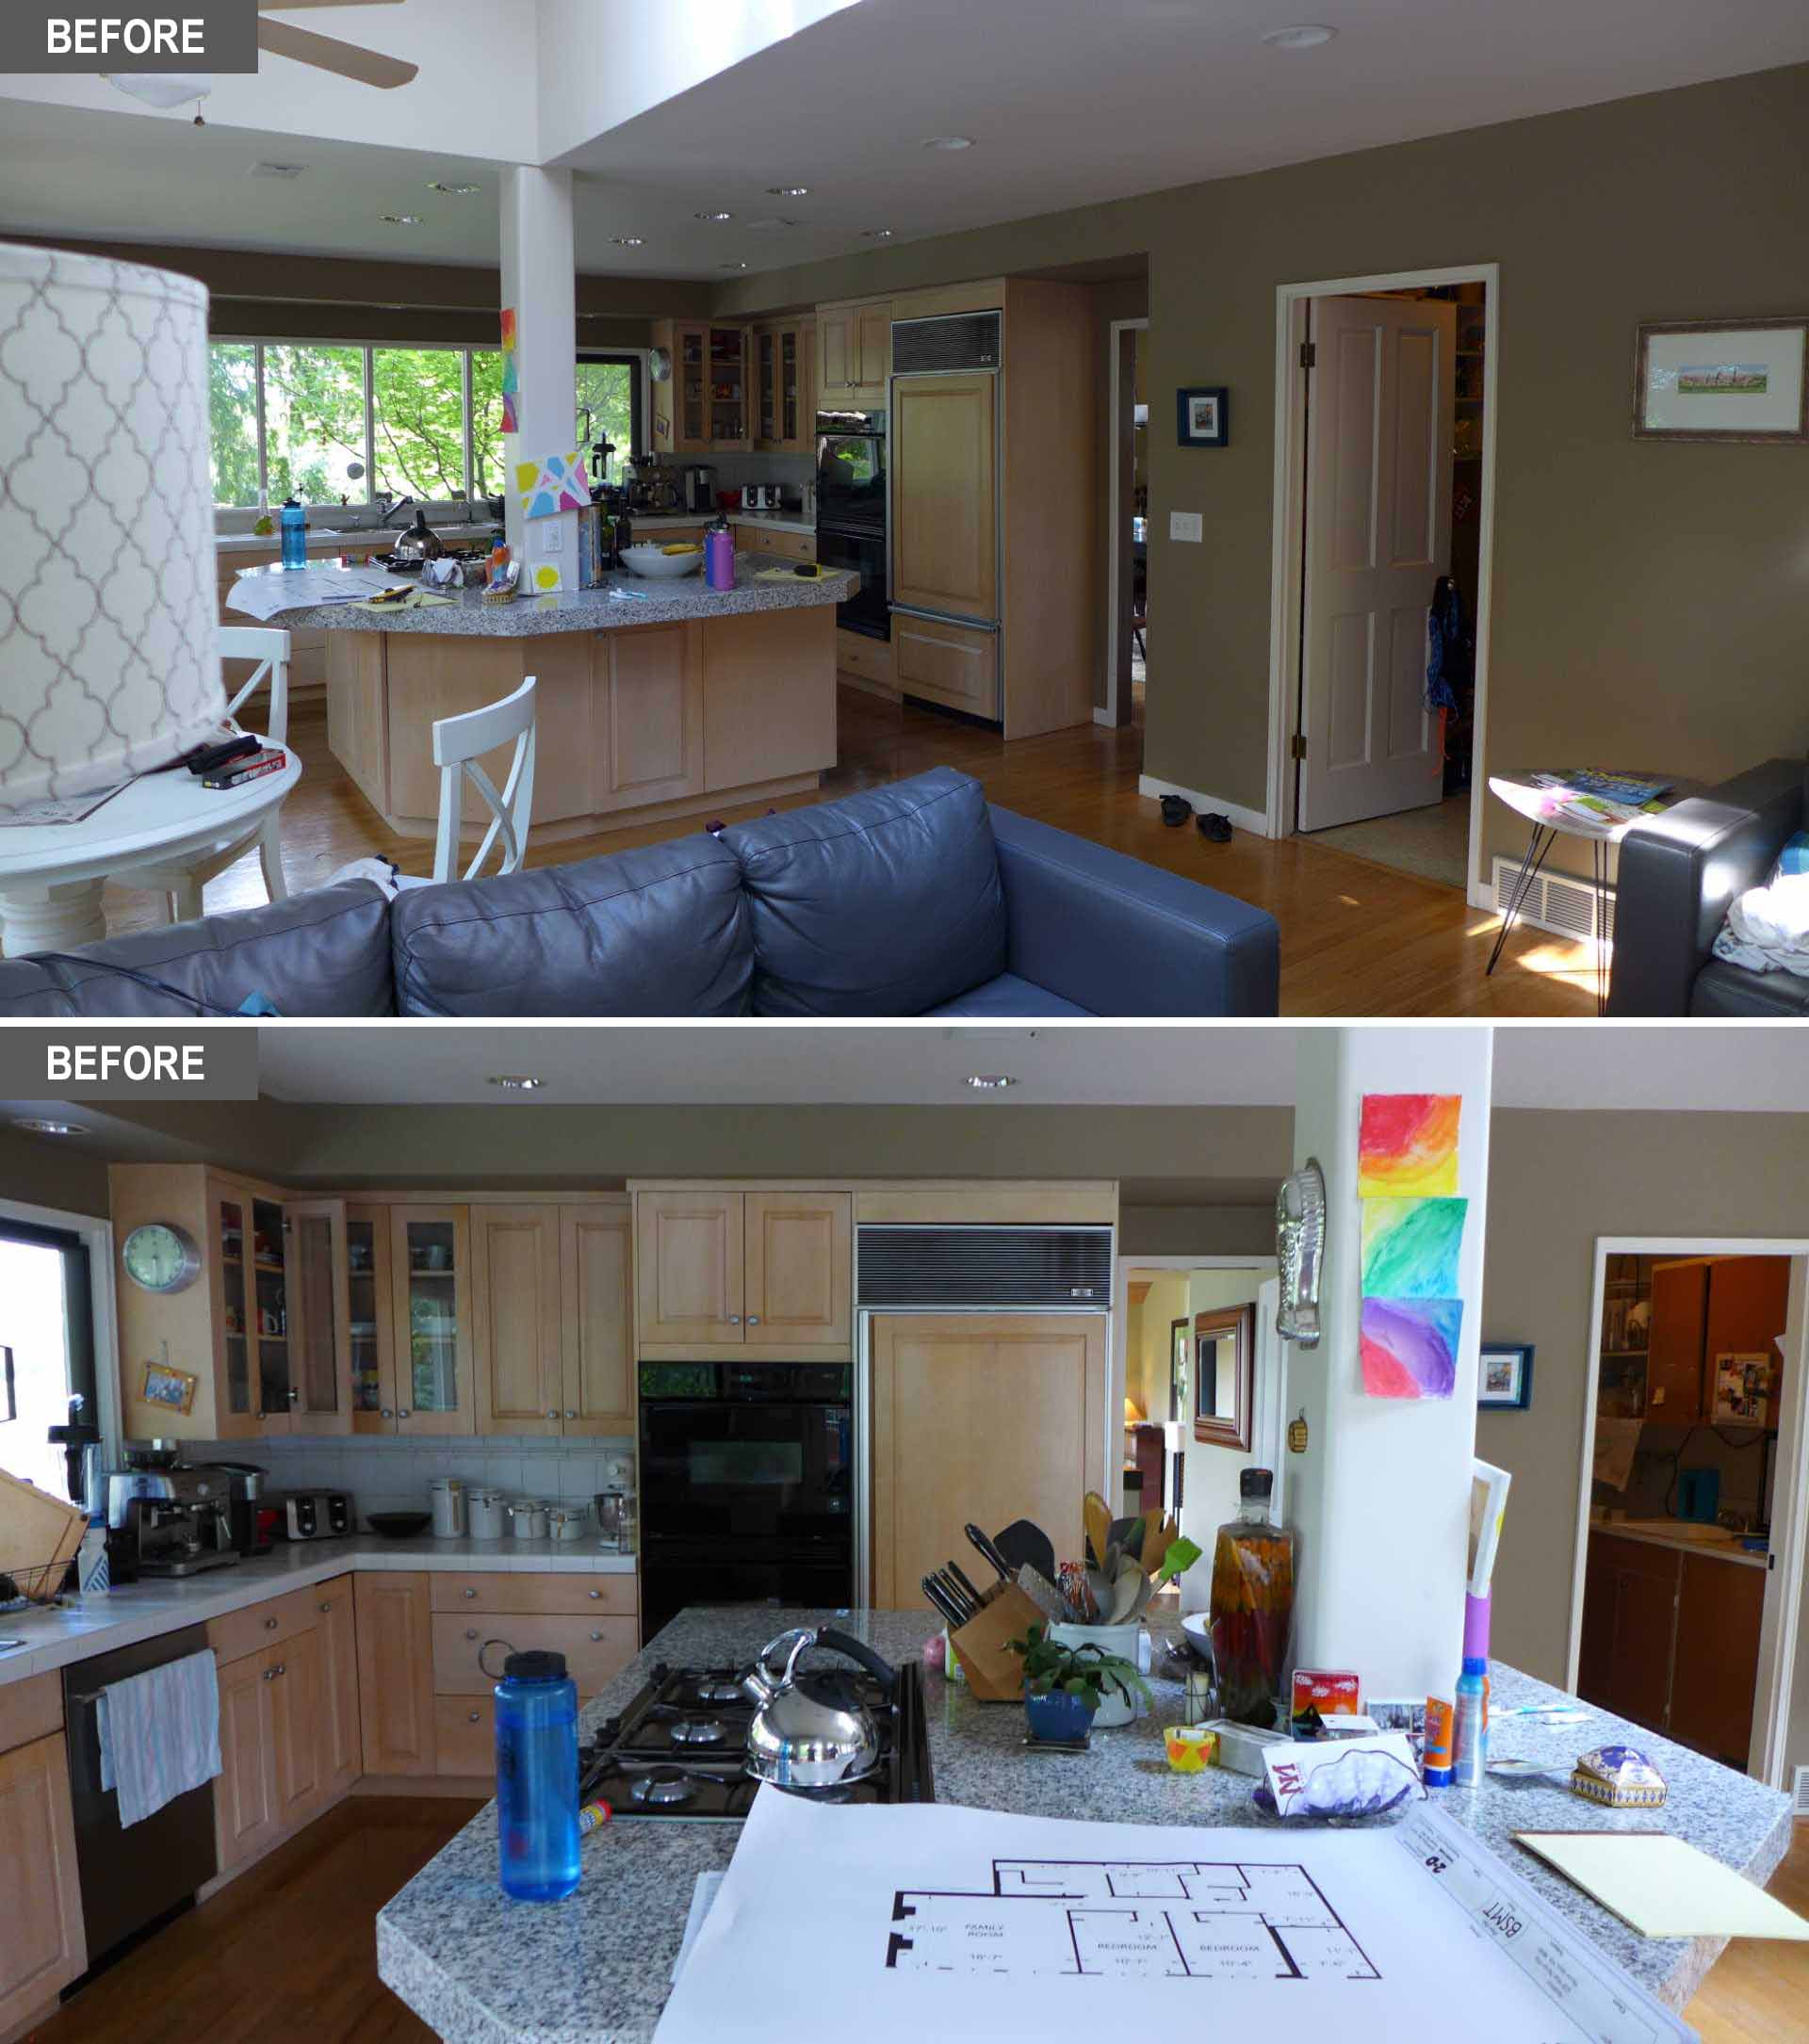 BEFORE REMODEL - The original kitchen had an island in the middle of the space that included a large column, breaking up the countertop and sightline. 